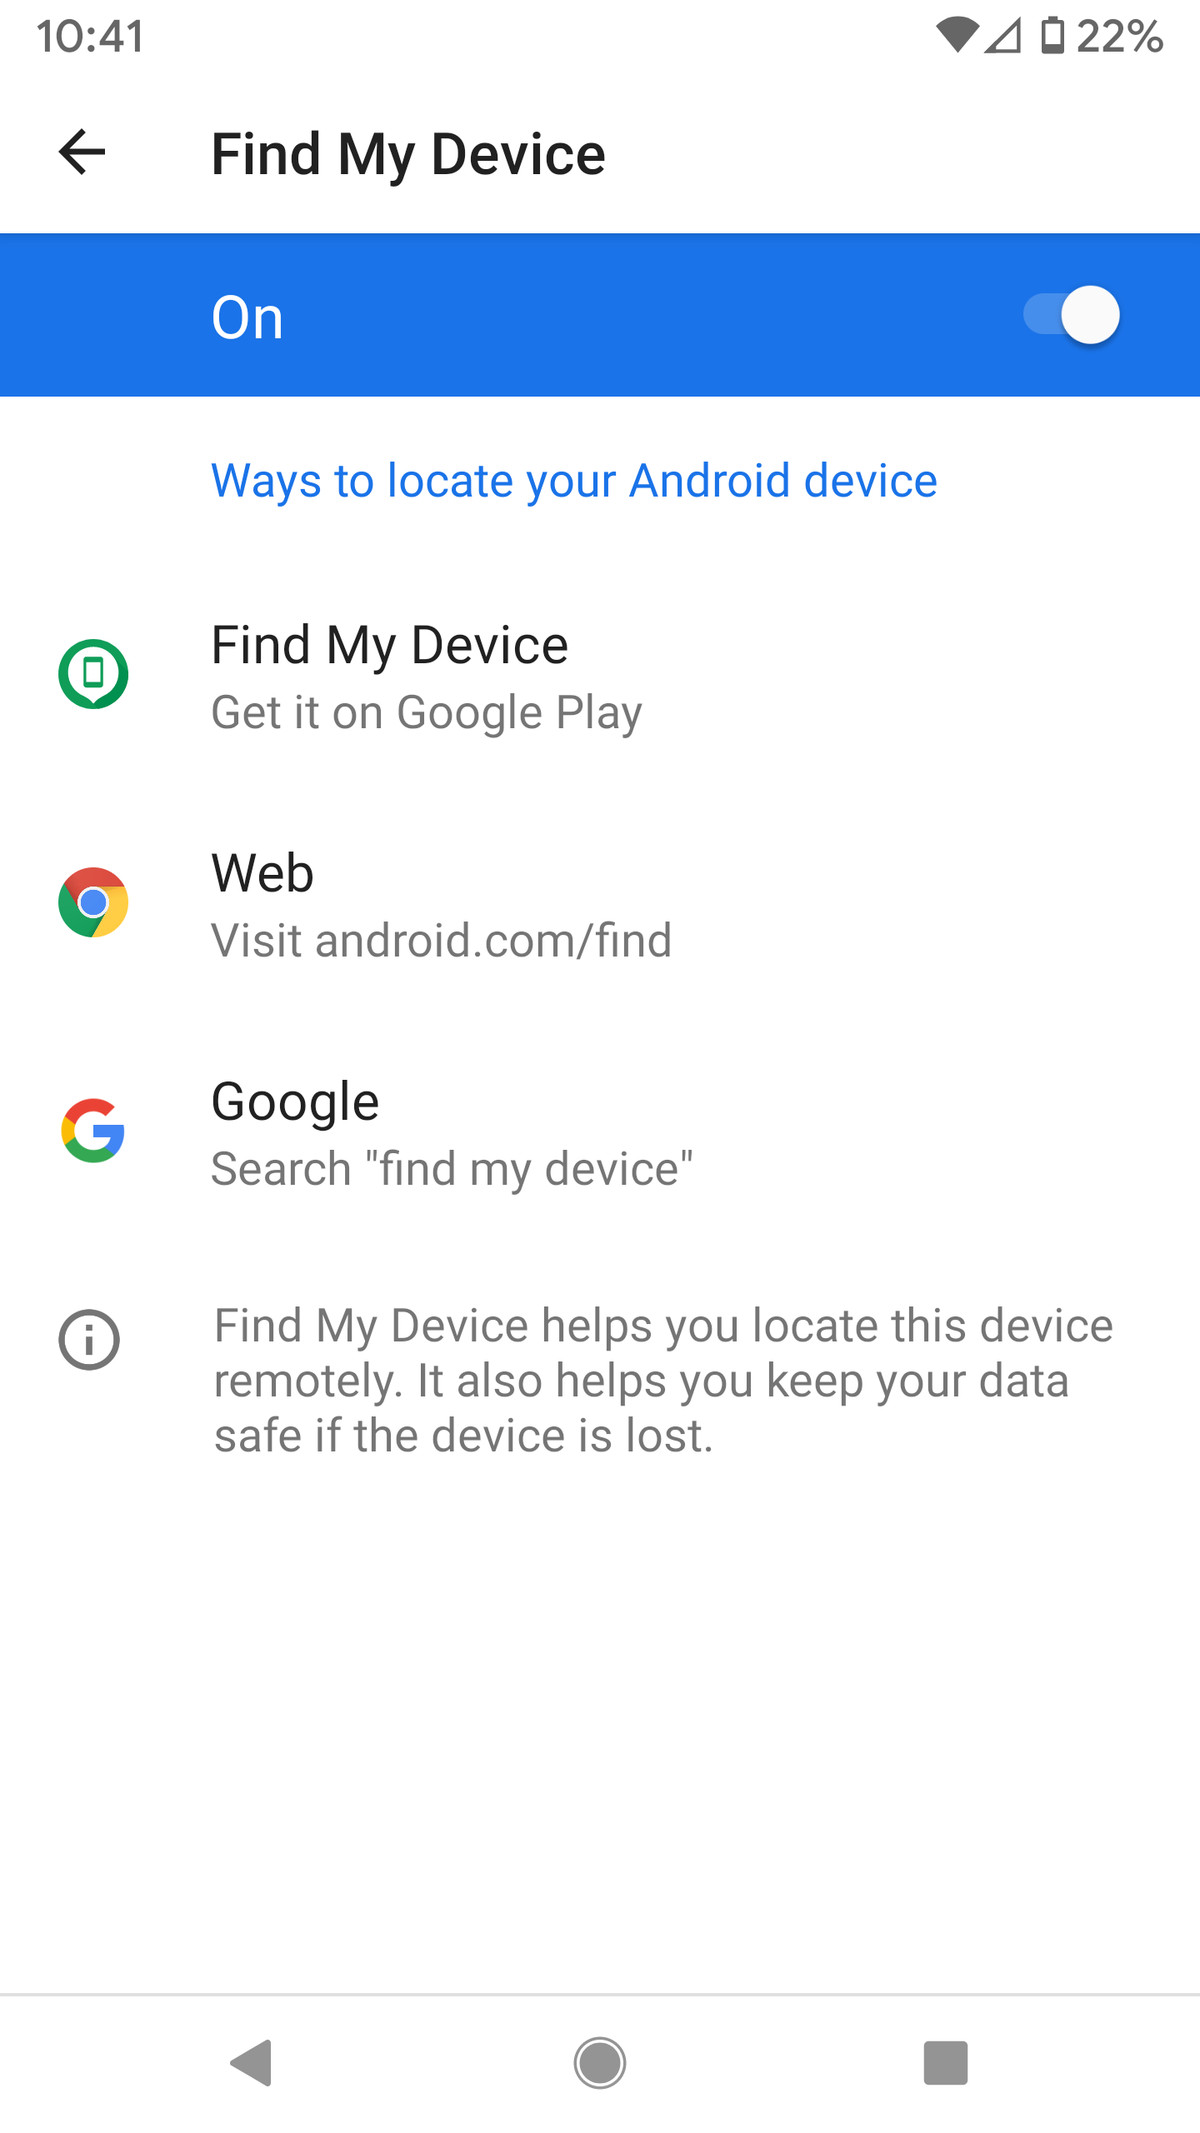 Go to Settings > Security > Find My Device to make sure it’s enabled.